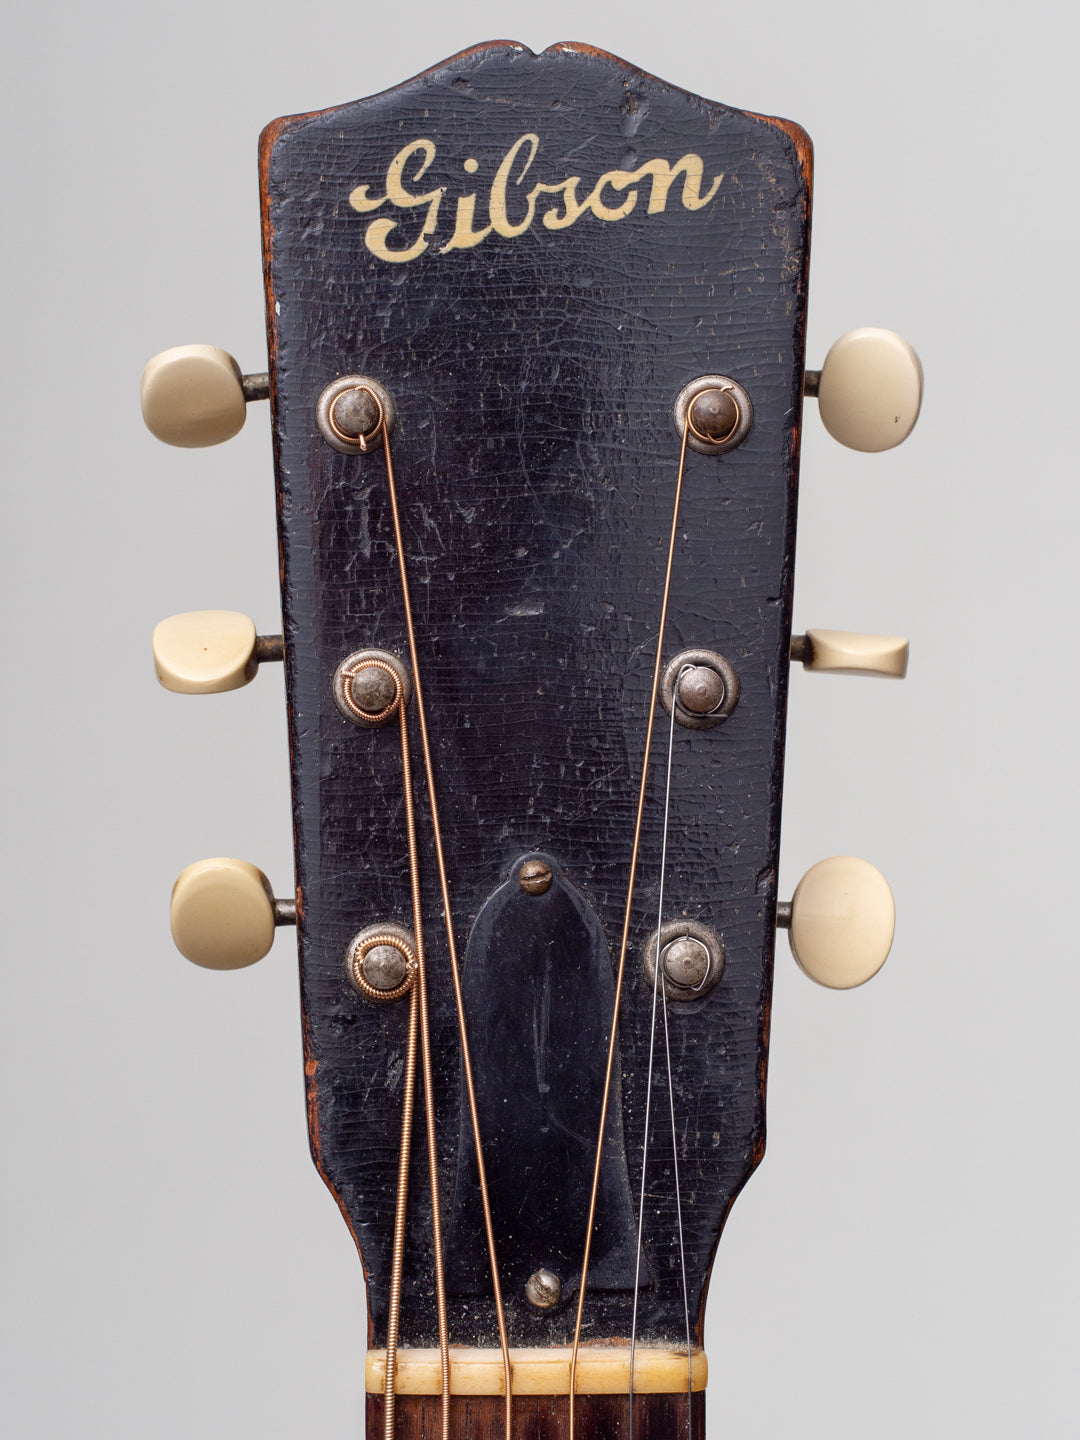 1931 Gibson L-1